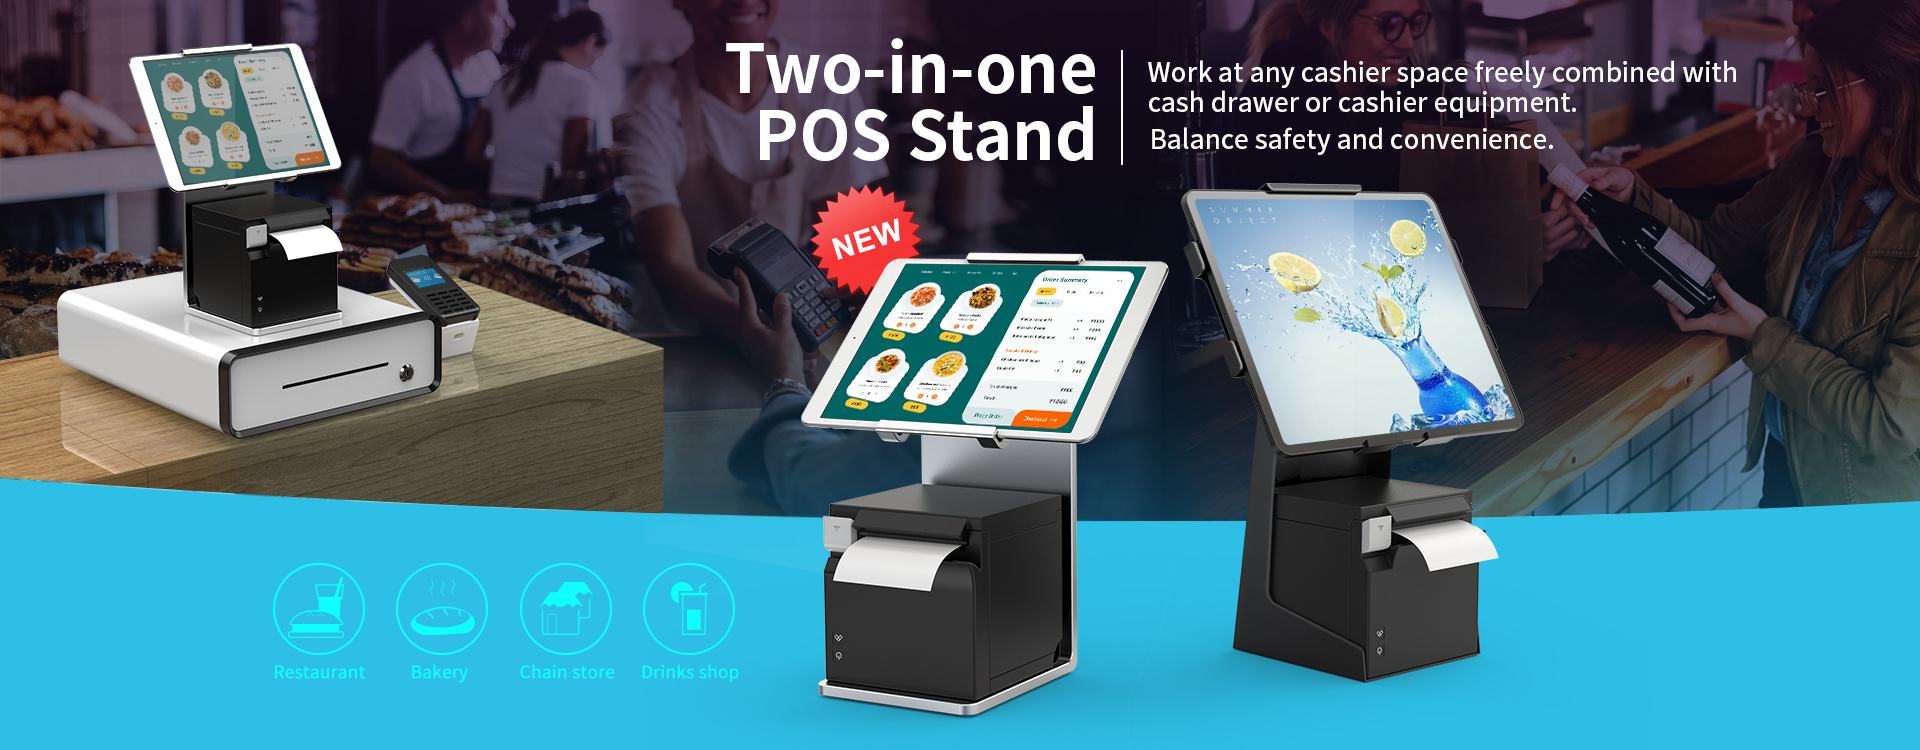 Two-in-one POS stand